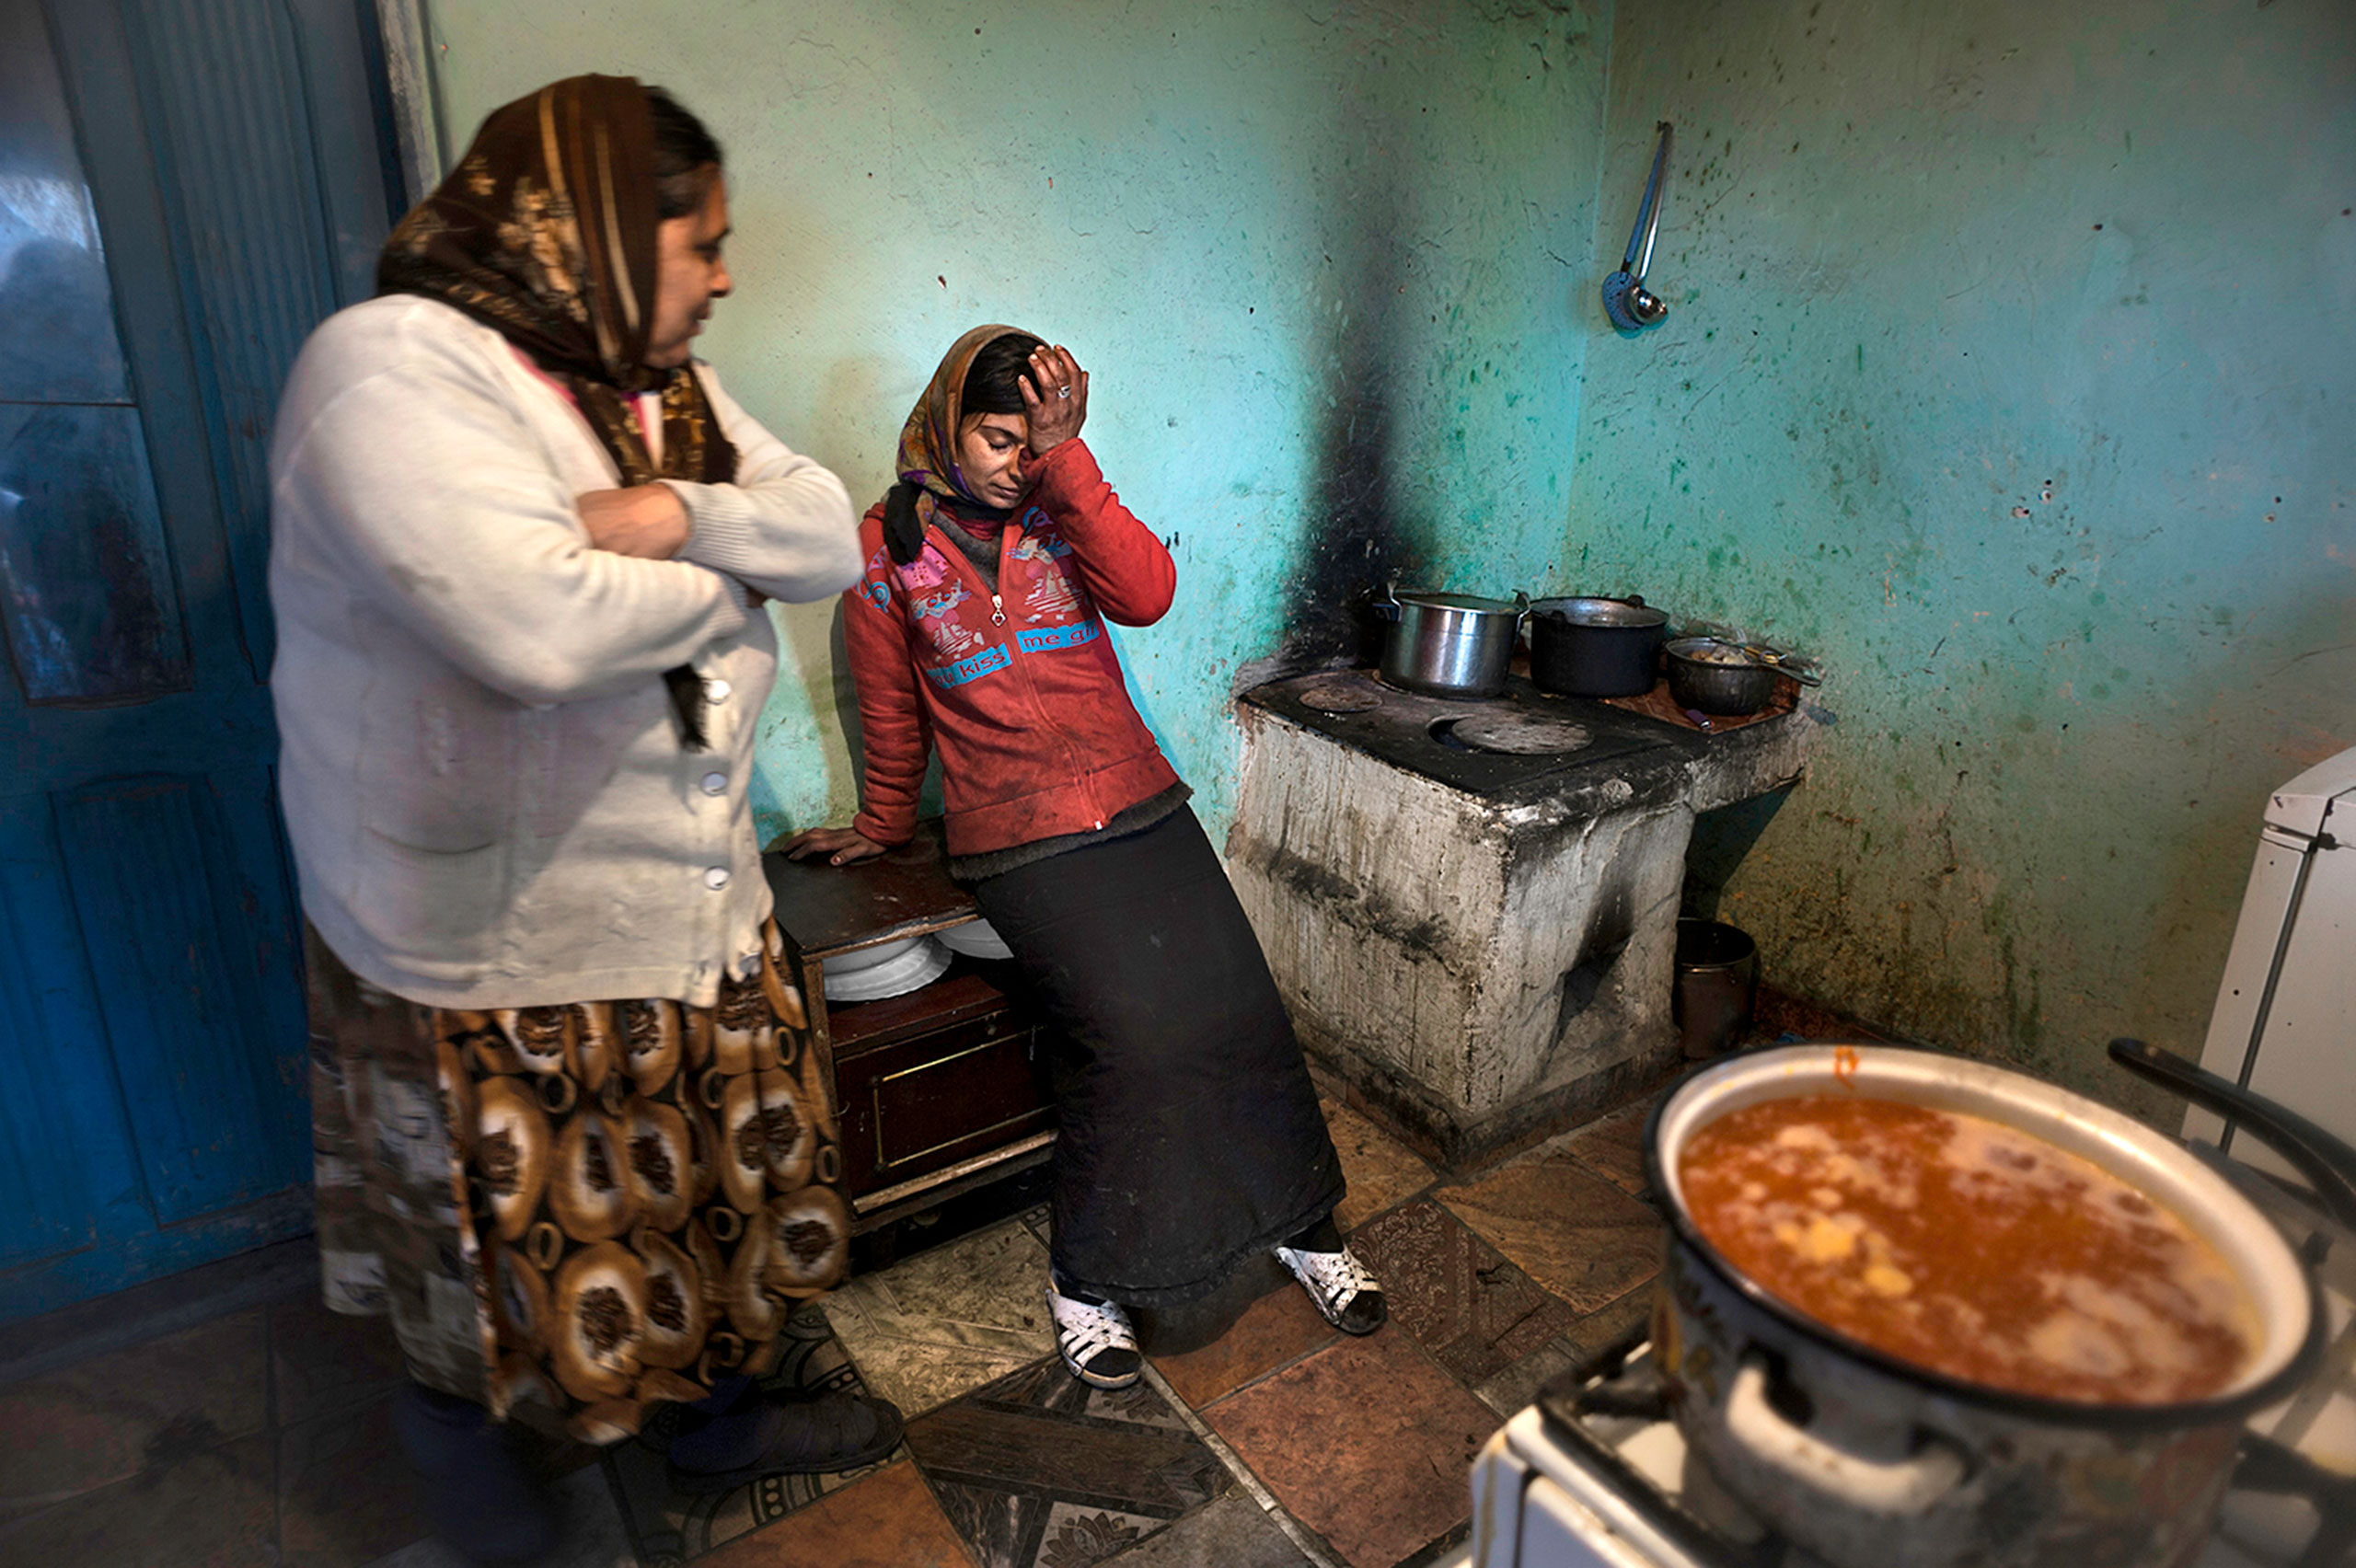 Complaining of stomach pains Viorica Gulie, 31, takes a break from cooking soup for her family as her mother-in-law Constanta Gulie, 58,  looks on at left.  She suffers from Gastitis of her stomach.  With no money for medication or to go to the hospital she has to live in pain. Their house which has no running water or a bathroom is built on state land and they don't have title deeds so they are in fear of being evicted in Slatina, Romania.